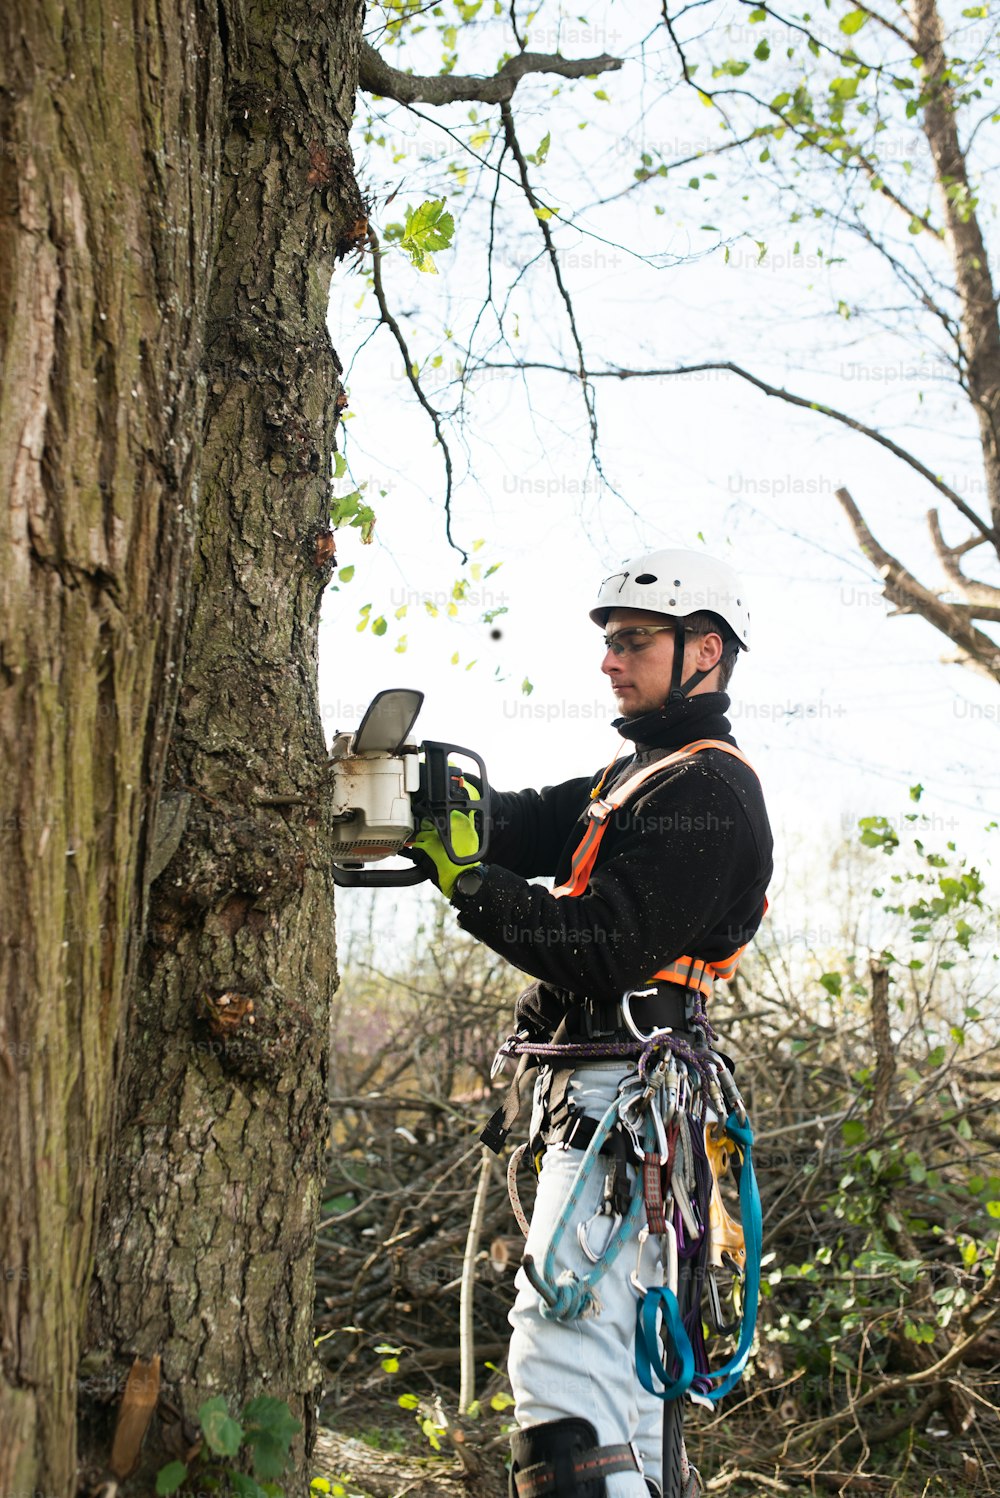 Lumberjack with chainsaw and harness pruning a tree. Arborist cuting tree branches.